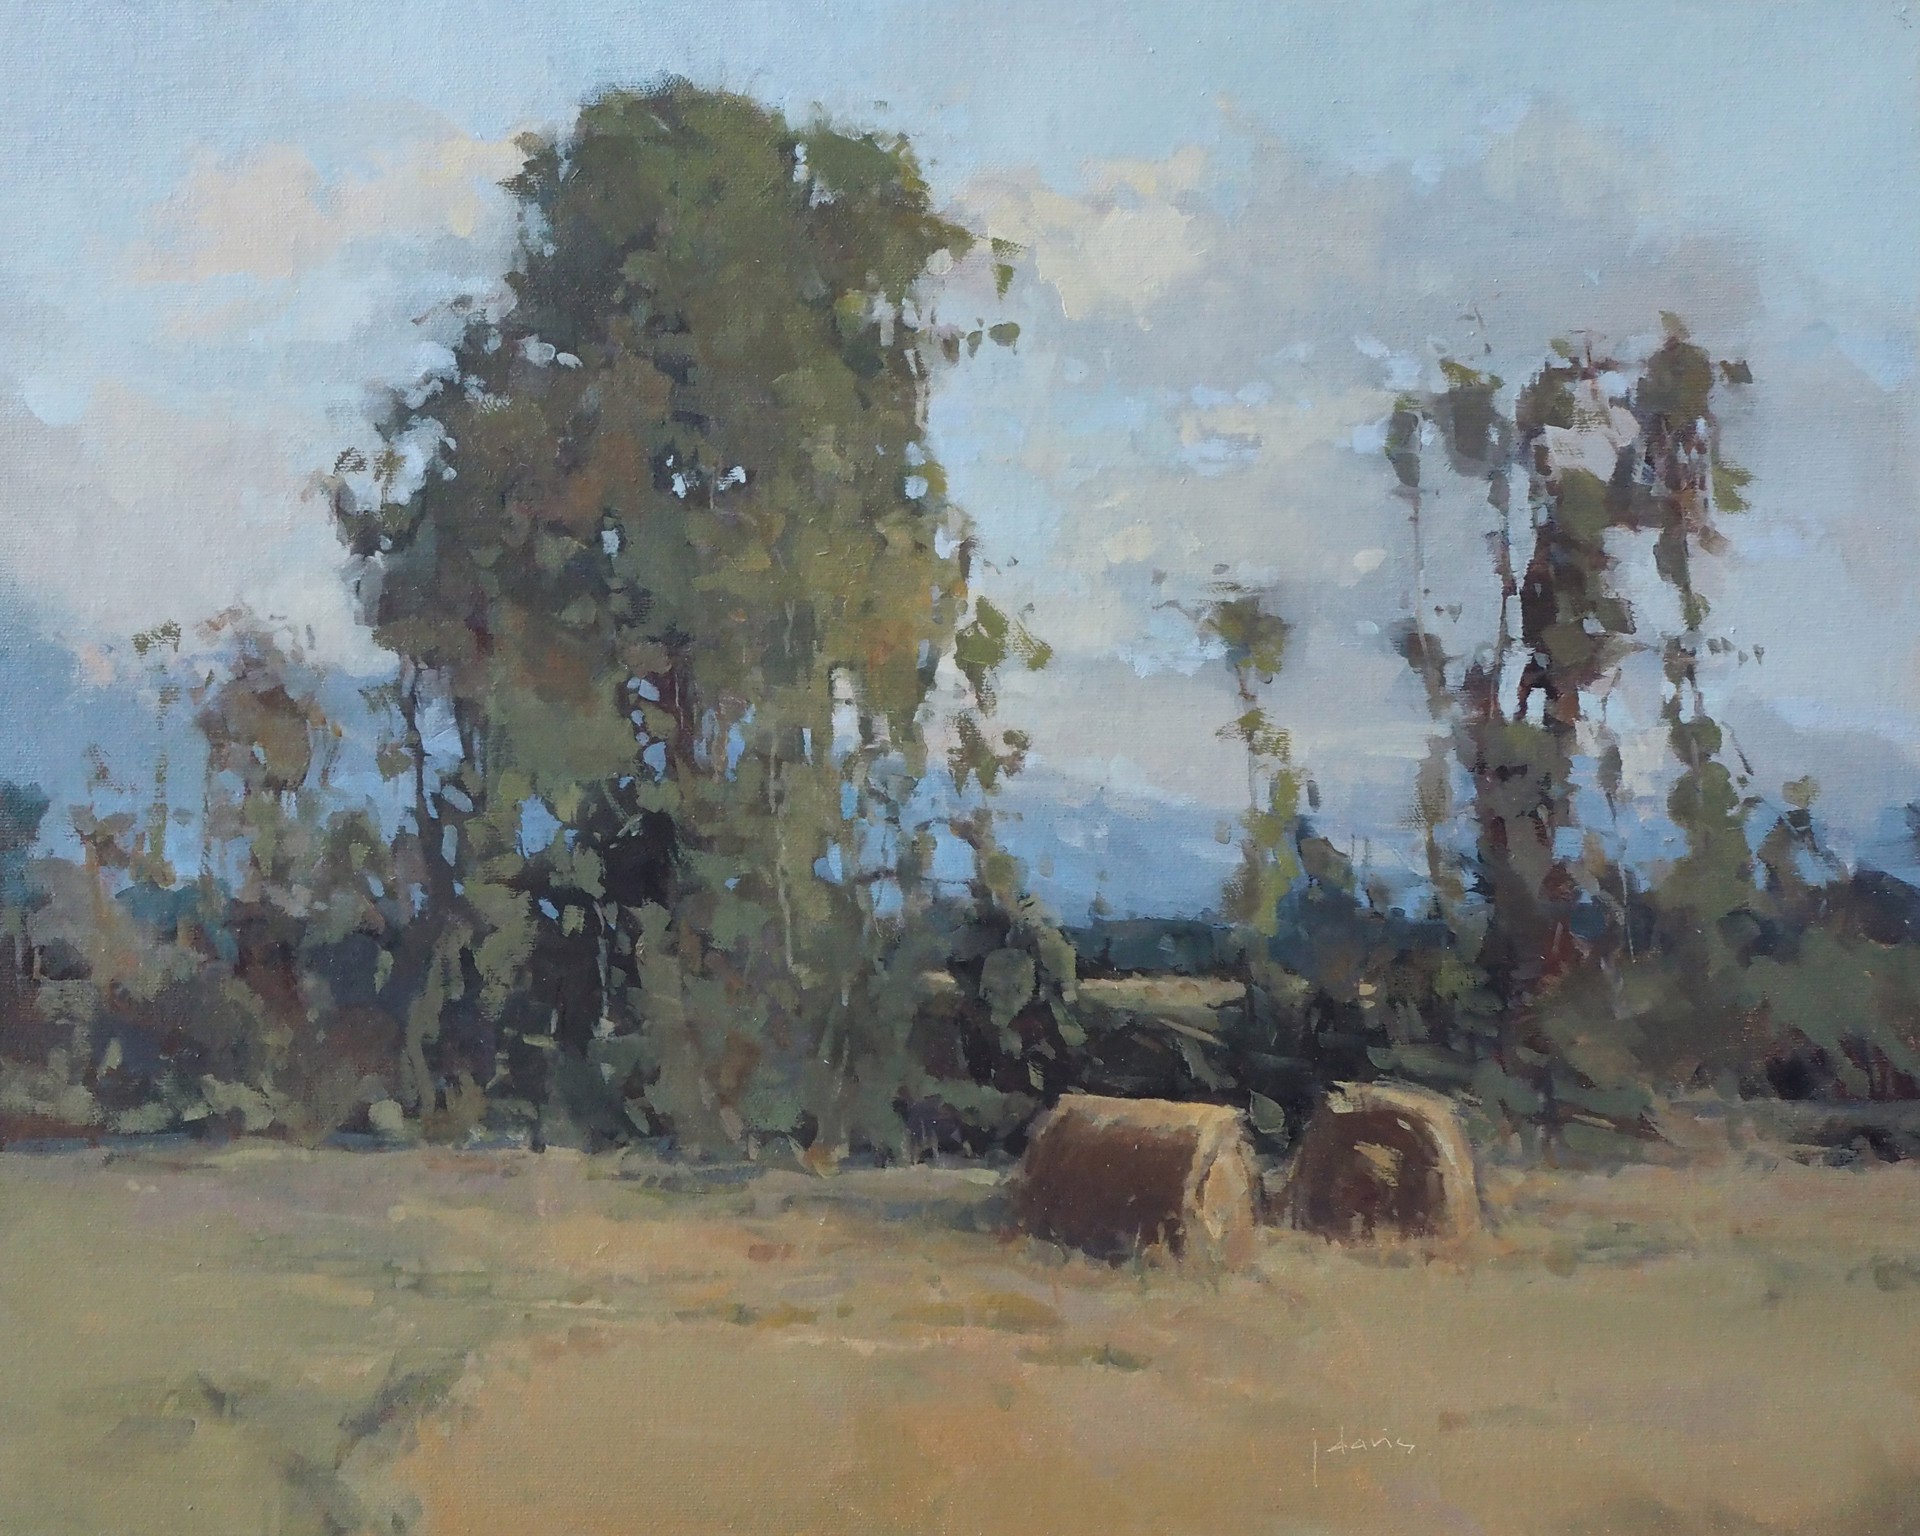 Hay Bales in the Morning Light by Julie Davis